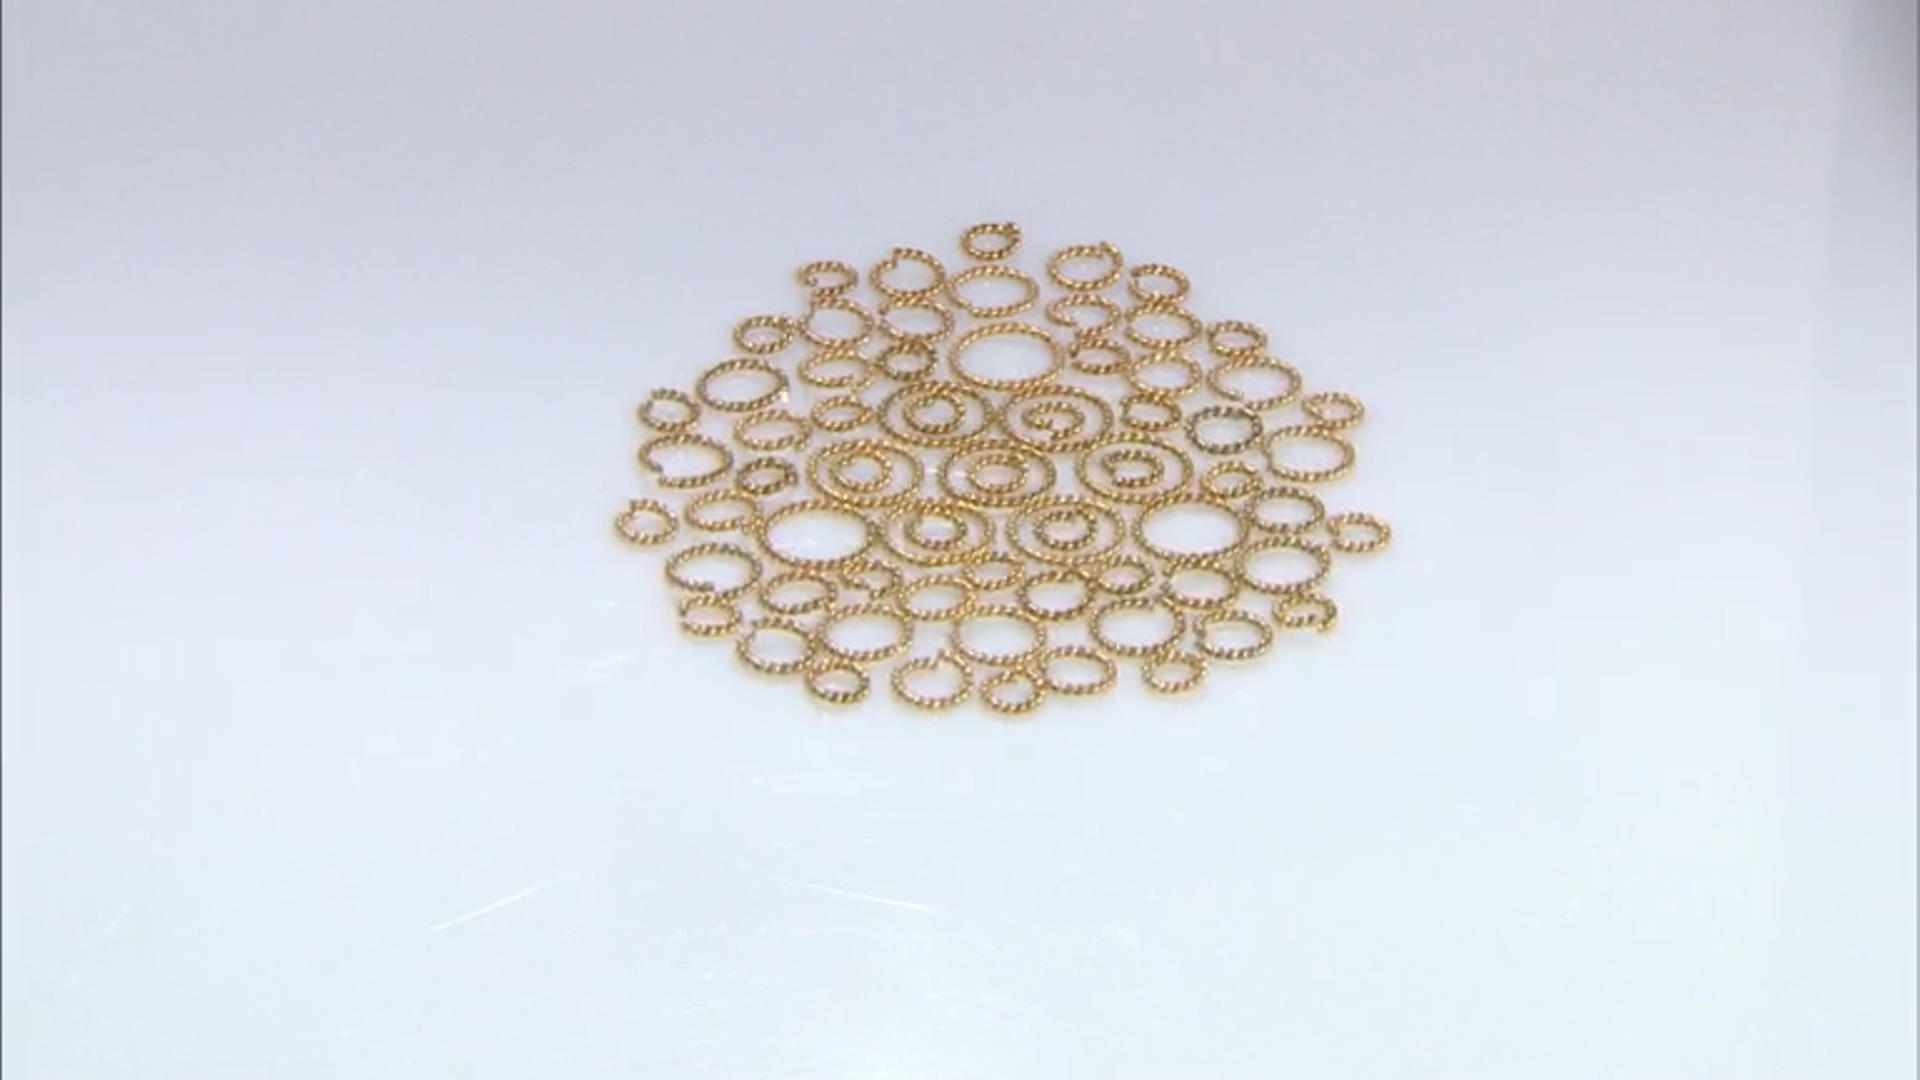 18 Karat Gold over Stainless Steel Rope Textured Jump Rings in 4 Sizes Appx 70 Pieces Total Video Thumbnail